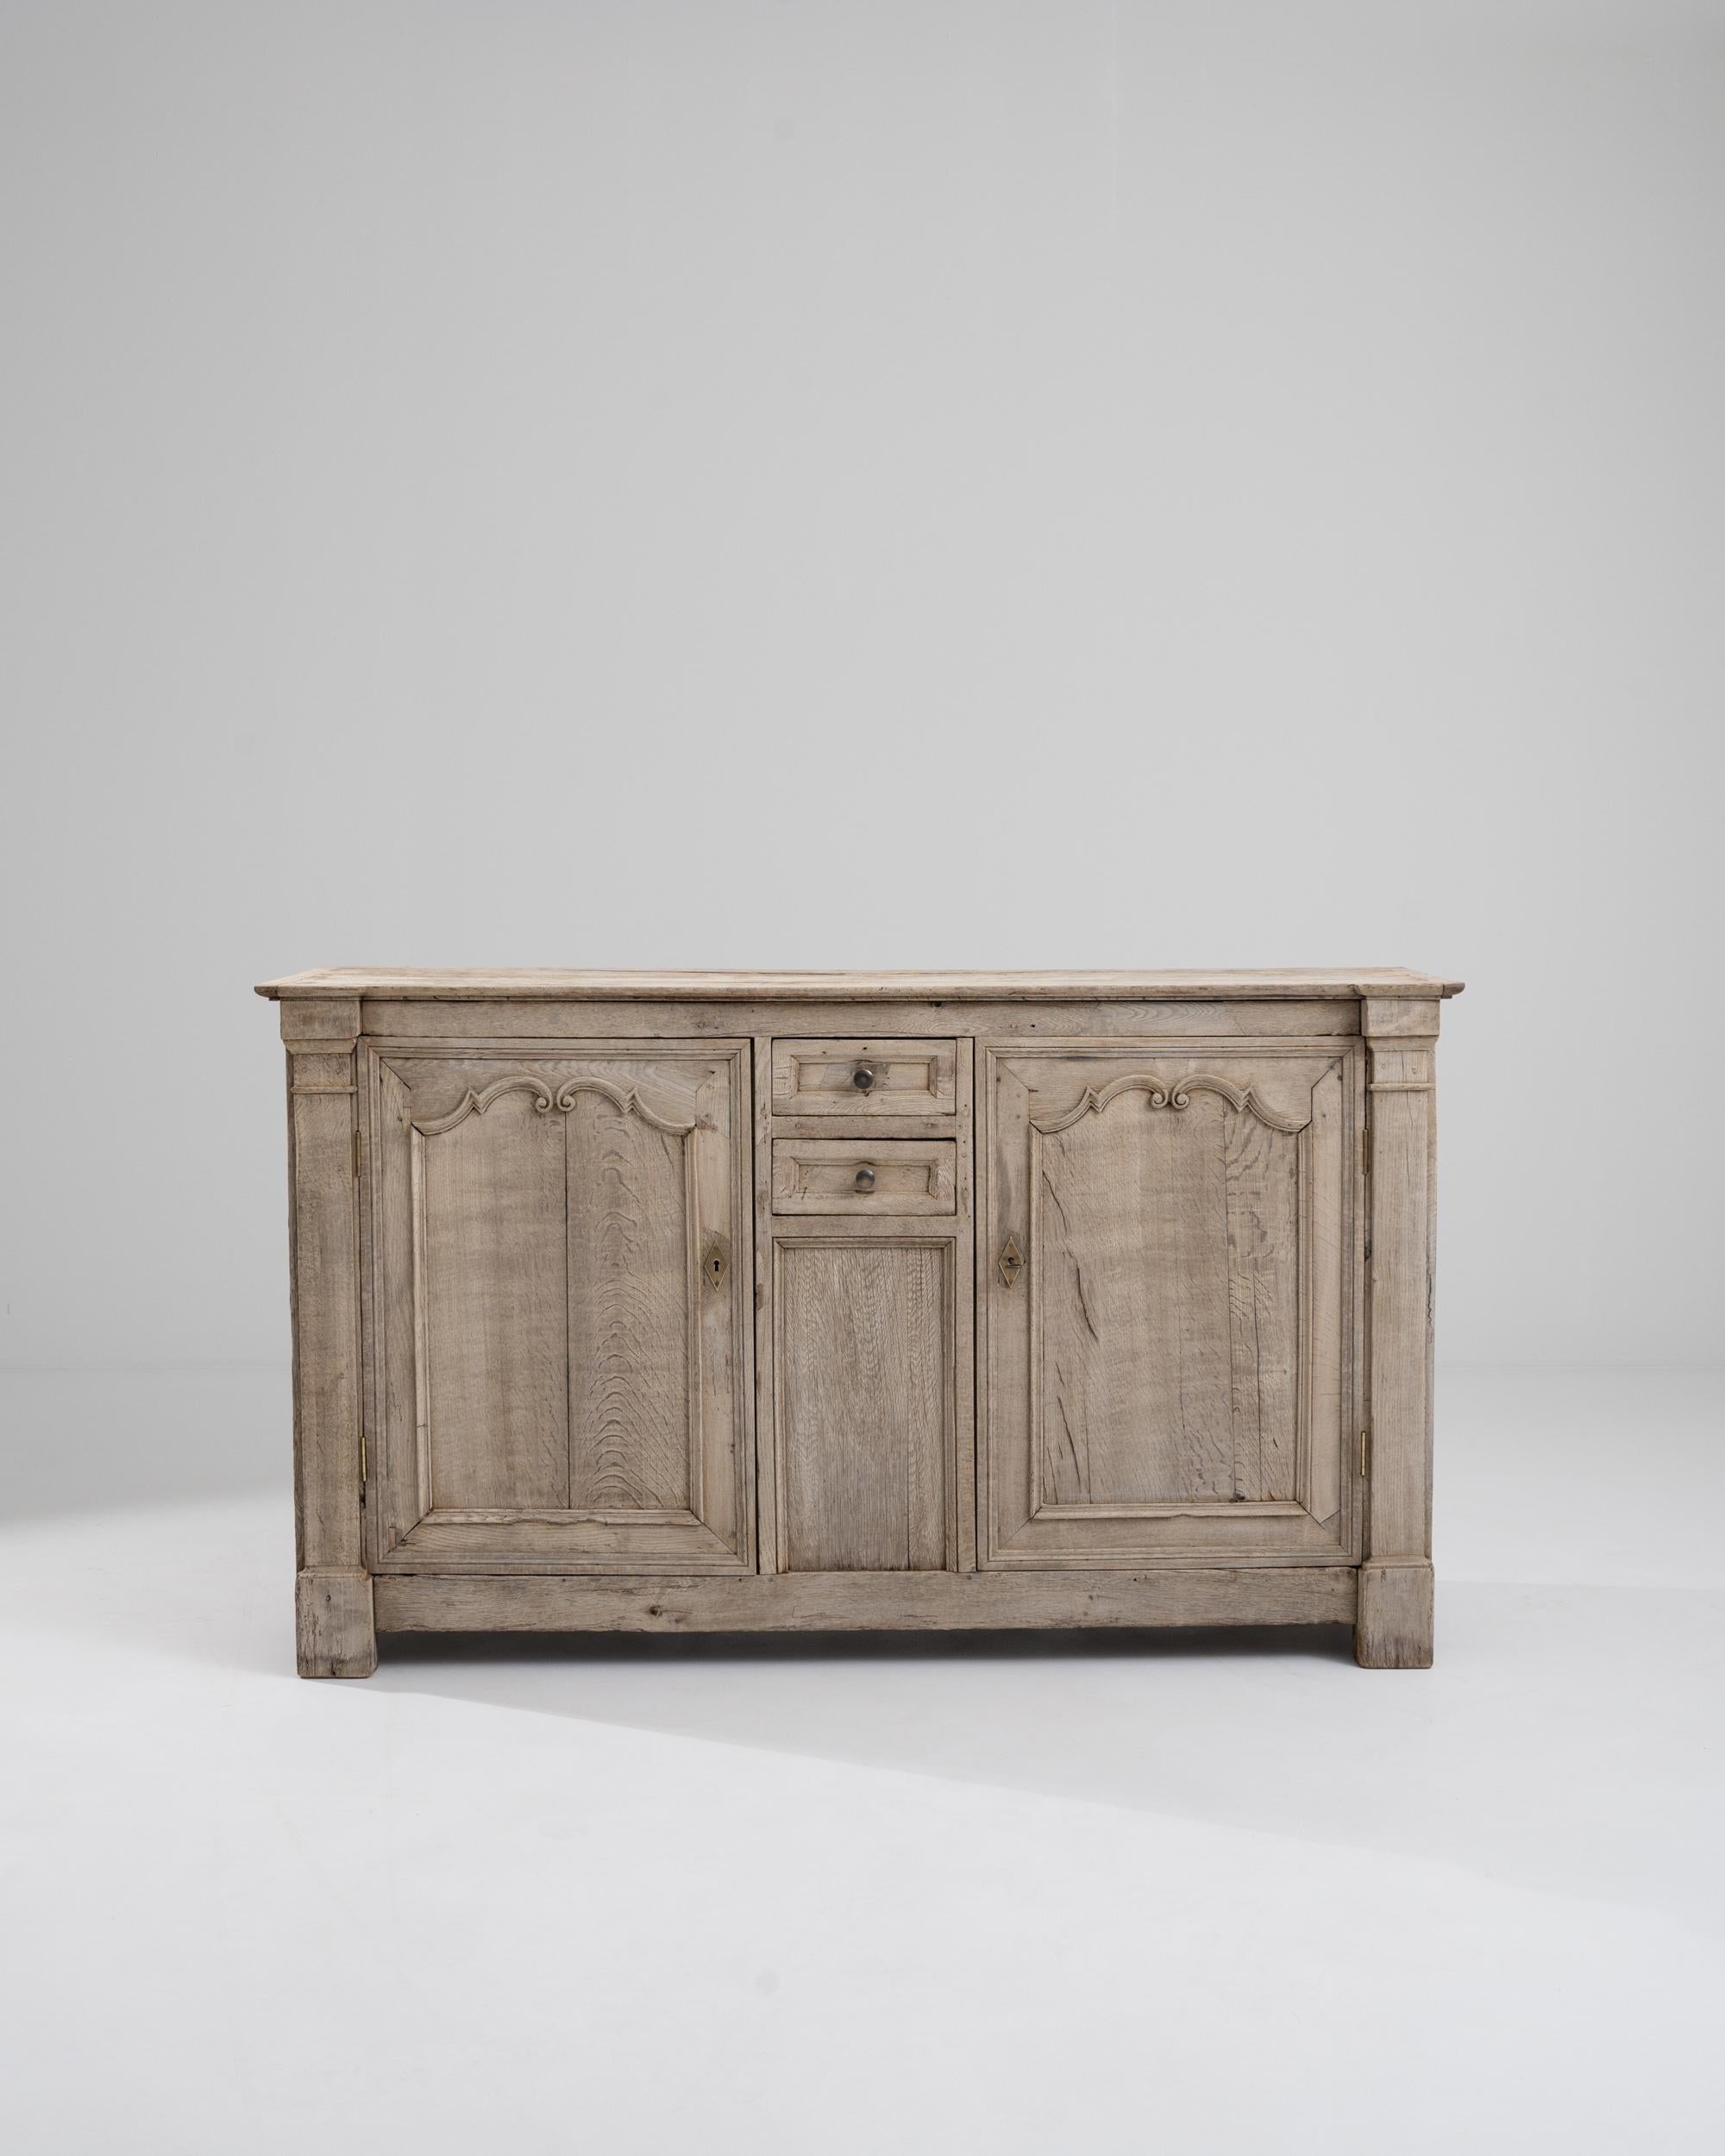 A wooden buffet from 19th century France. Spiraling panel details, careful joinery, and faux columns construct a buffet whose bleached oak shines almost like a chiseled marble block. This buffet offers ample storage as well, featuring four large